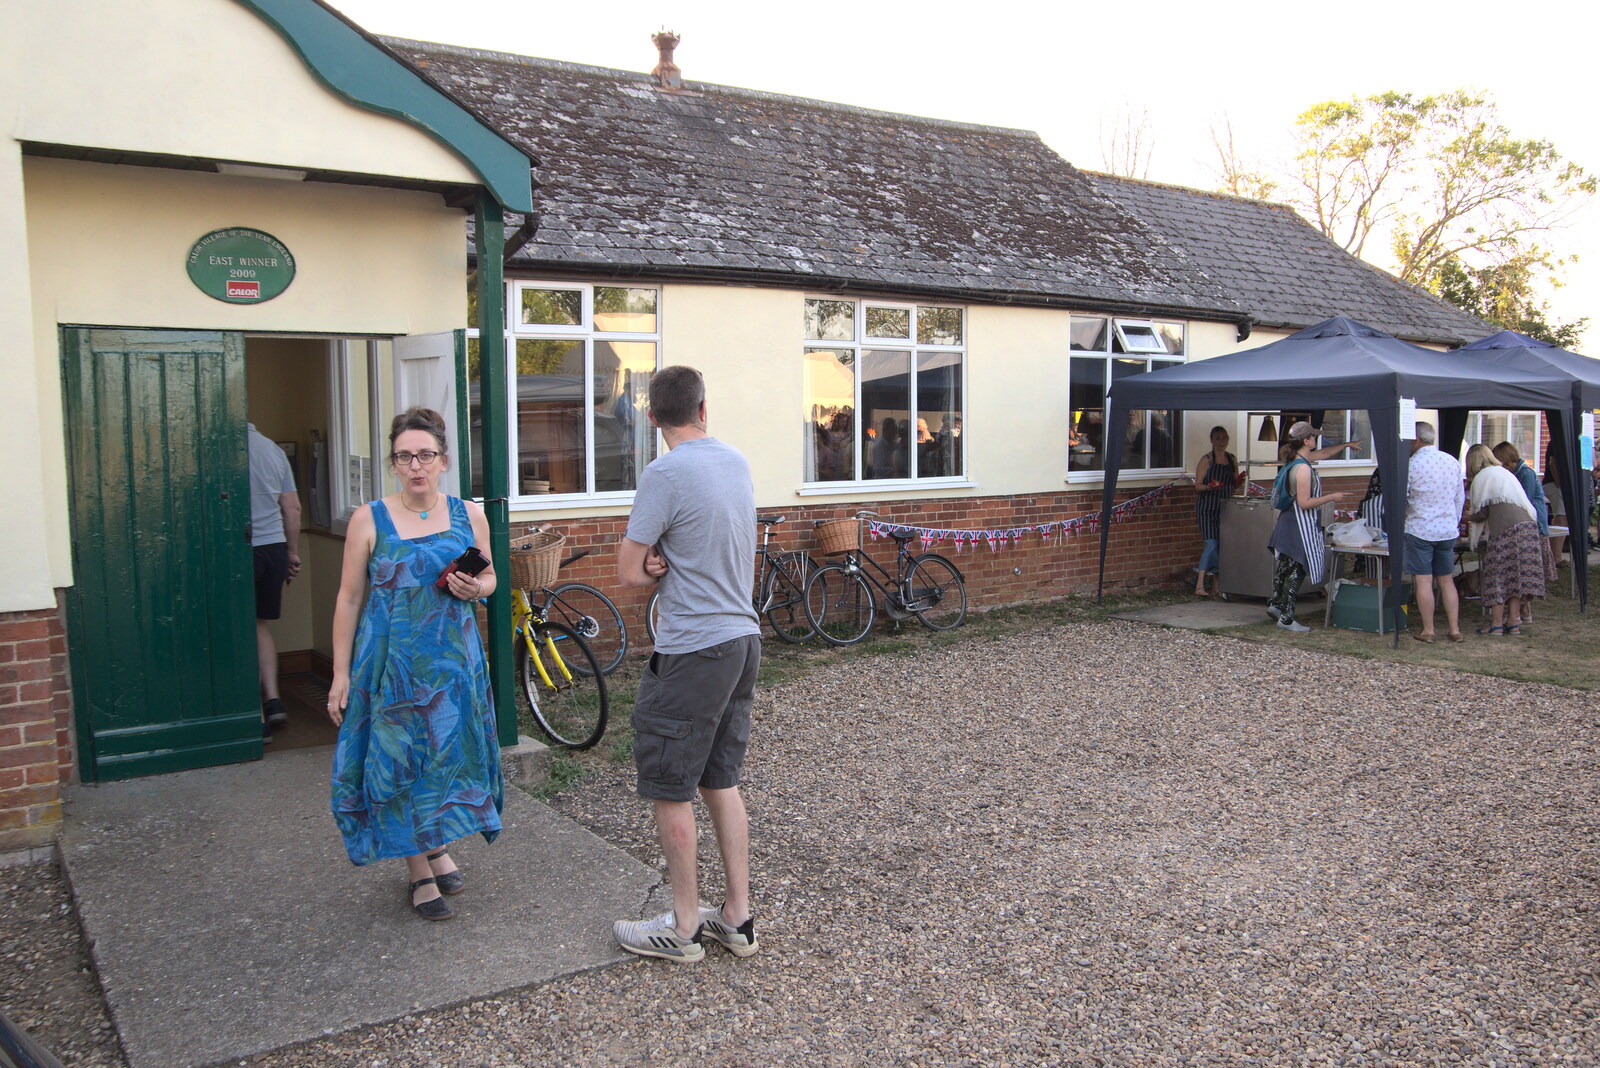 The Denton Beer Festival and a Party, Brockdish, Norfolk - 16th July 2022: Suey outside Denton village hall